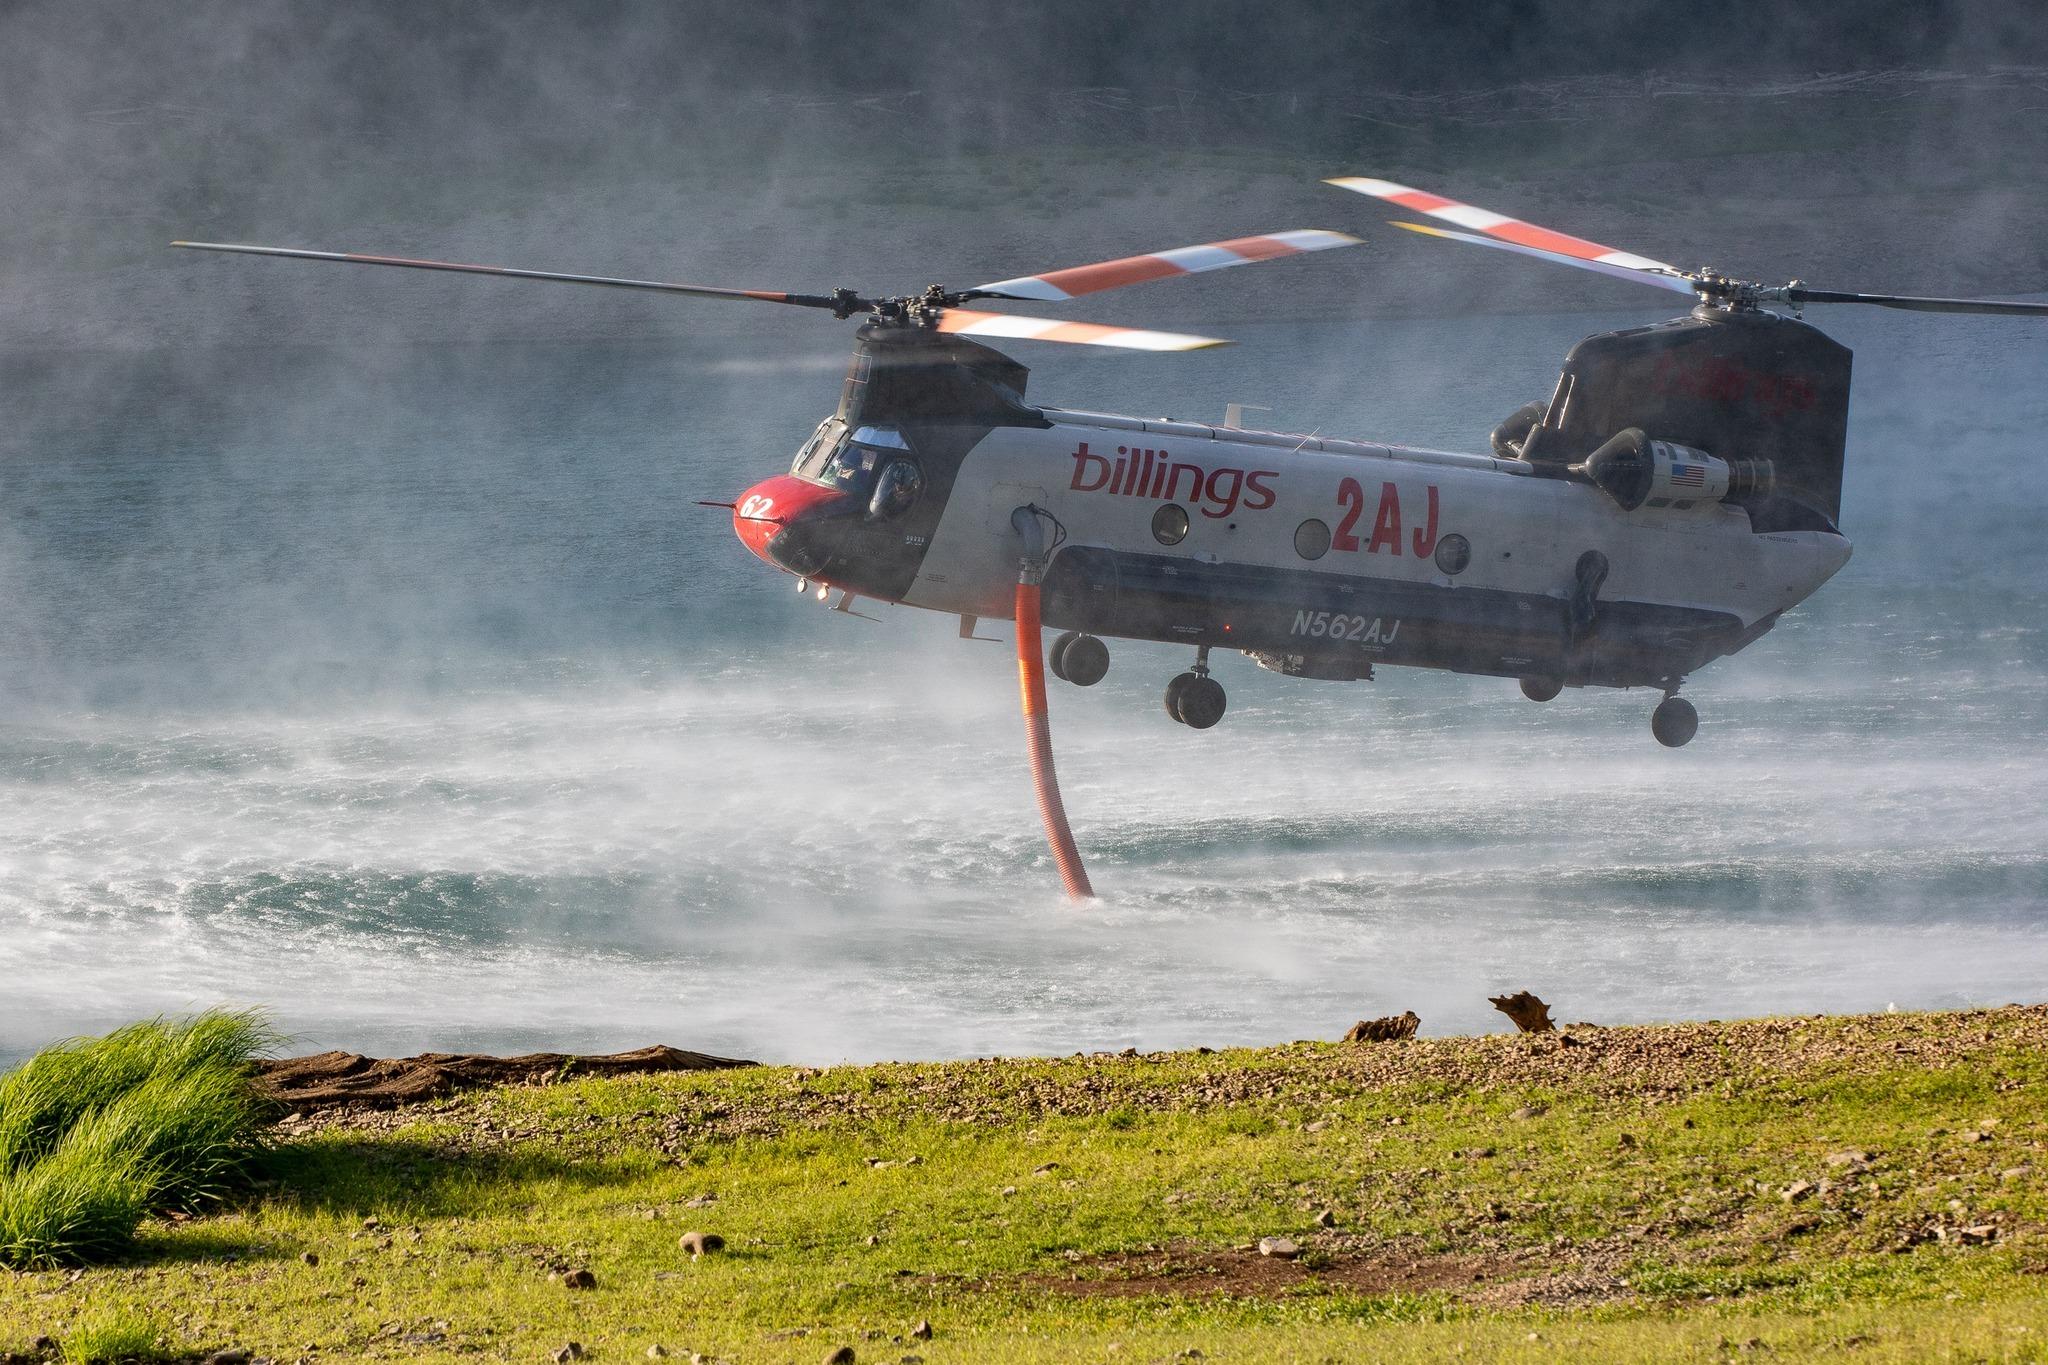 This is a close-up image of a helicopter refilling water from the lake.